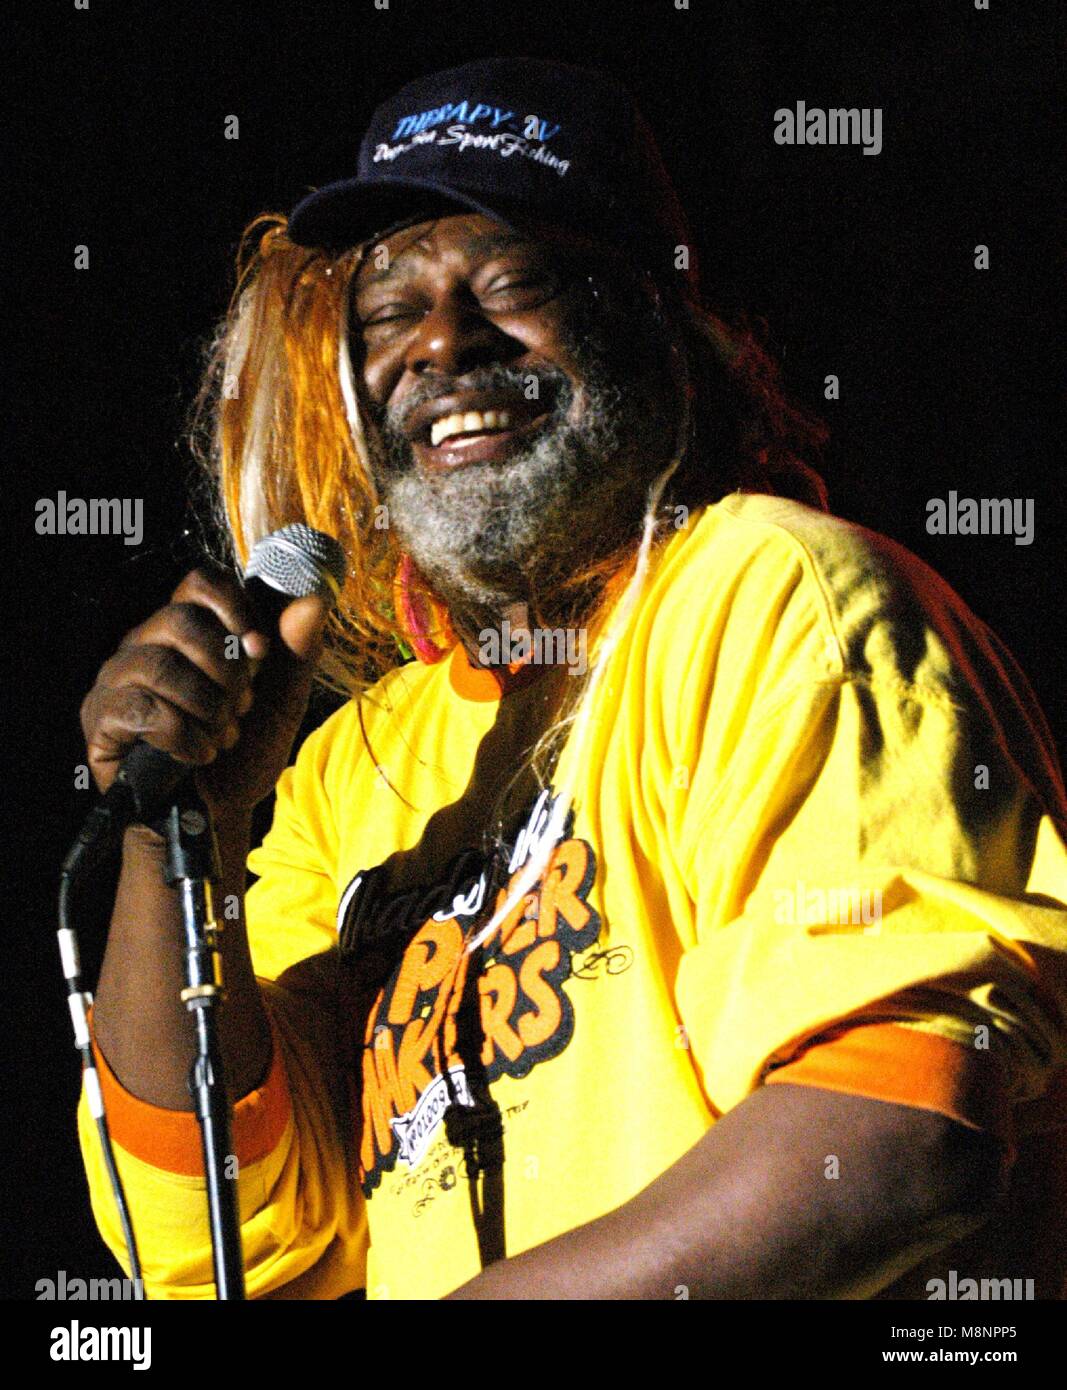 George Clinton brings his Parliament Funkadelic to Atlanta's On The Bricks Concert Series in Centennial Olympic Park on June 4, 2004. © RTMcKay / MediaPunch Stock Photo